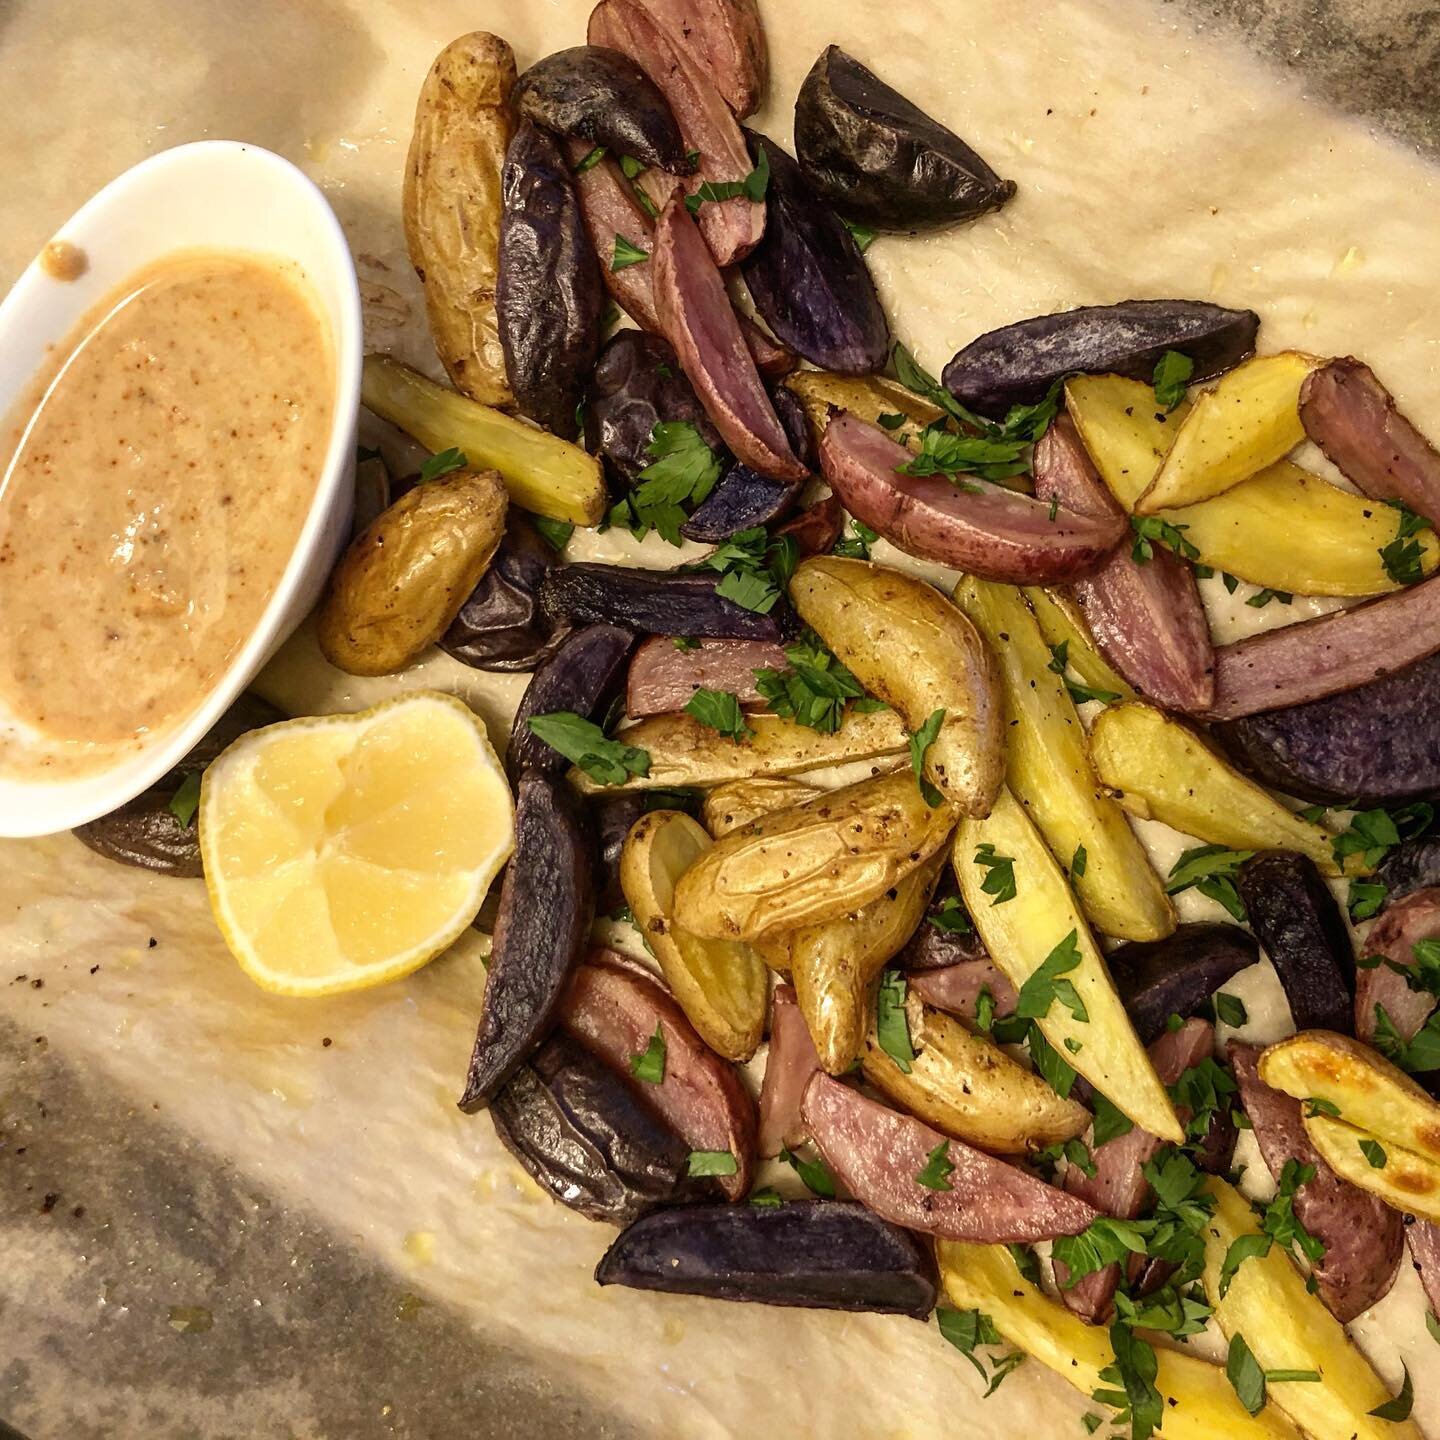 These are worth starting the oven for!! Baked @strohauerfarms fingerlings with harissa and lemon tahini dipping sauce. 🥔🍋❤️
Did you know that potatoes that are richer in color contain pigments called carotenoids and flavonoids that may protect our 